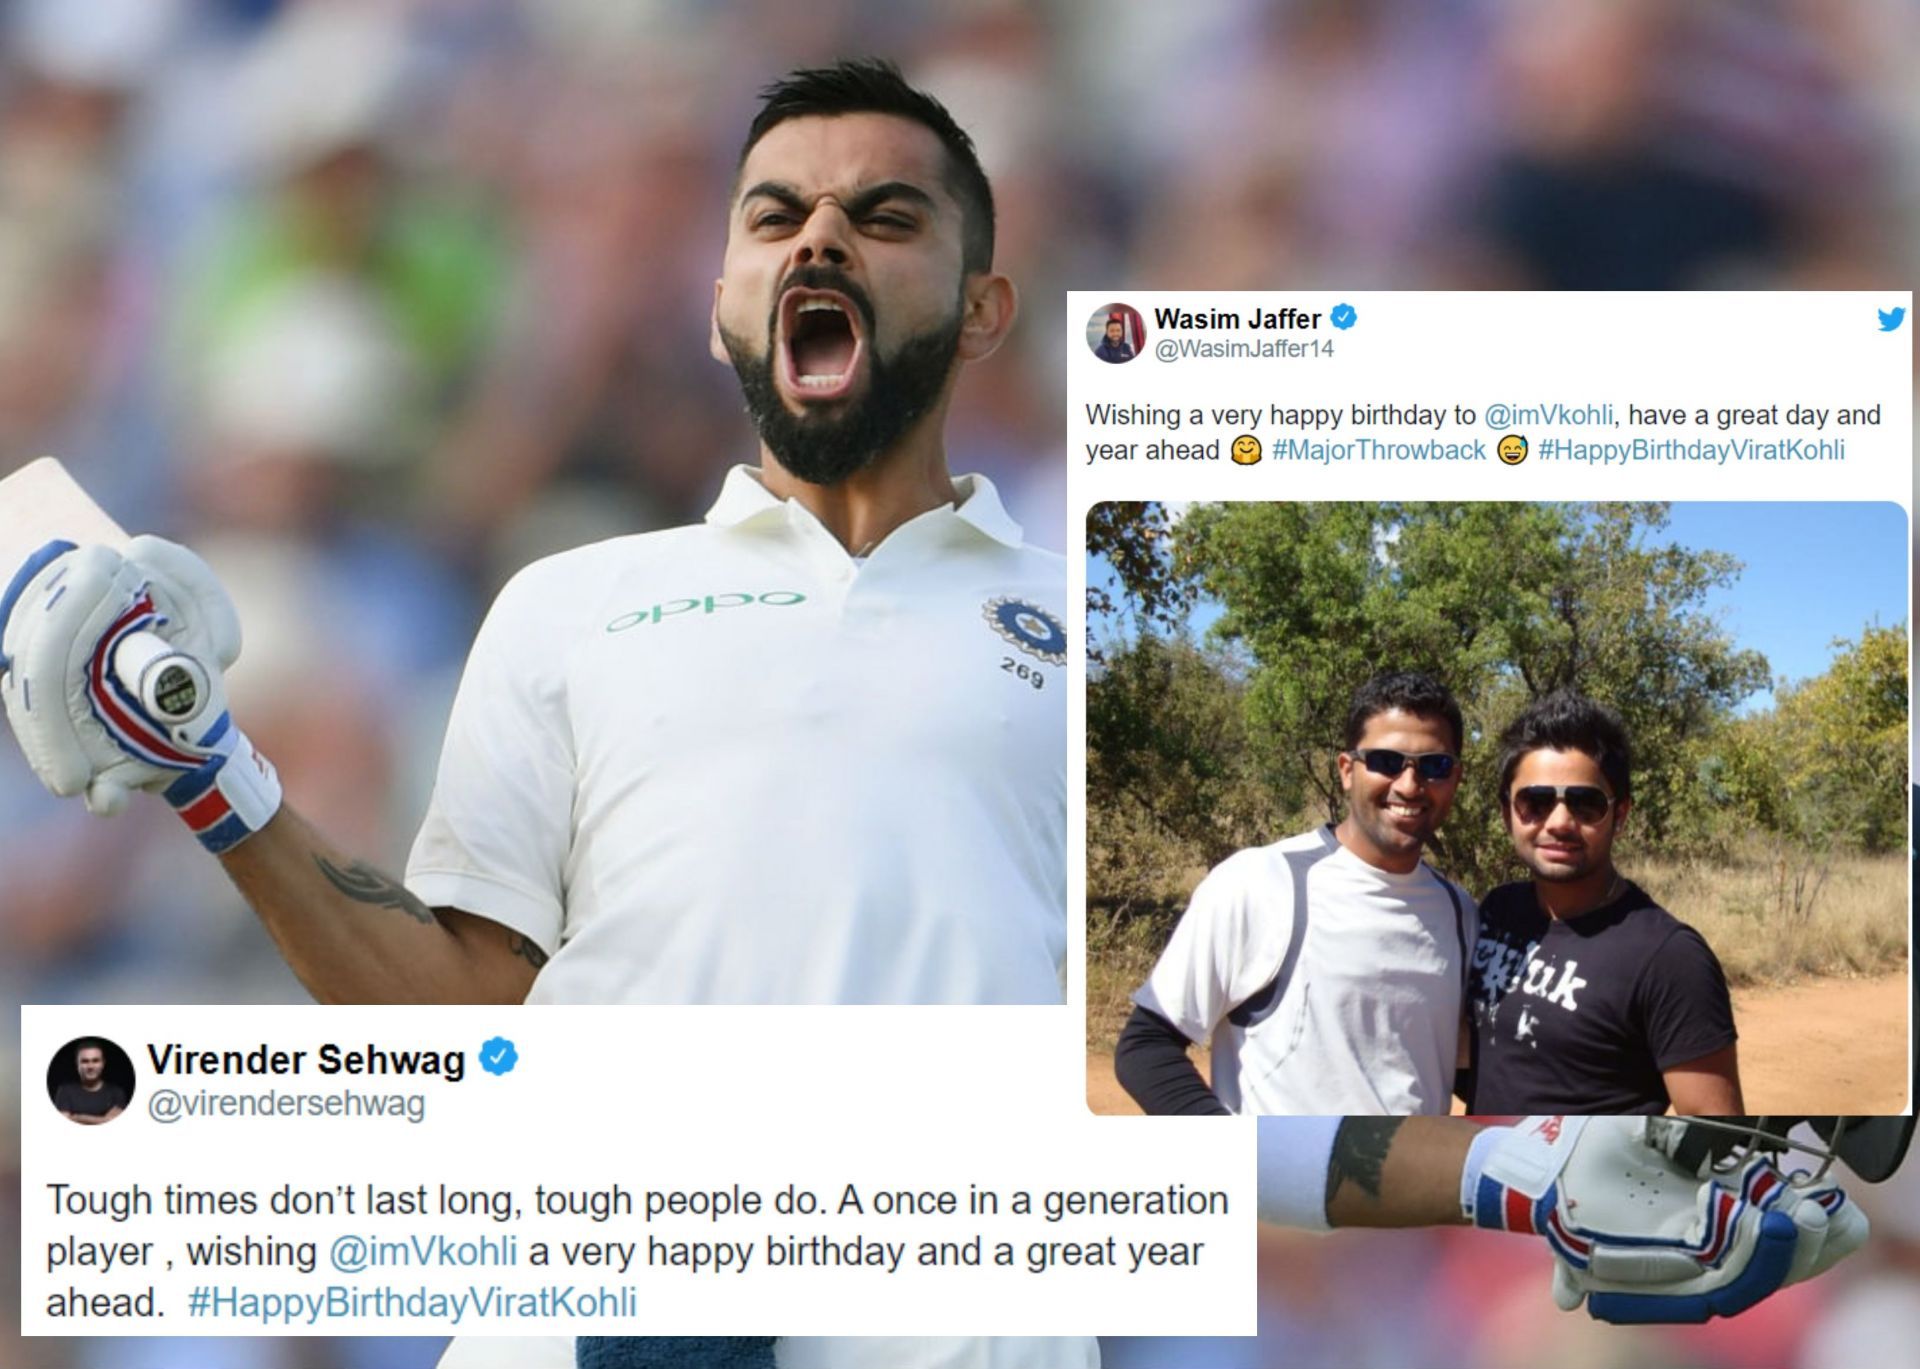 The cricket fraternity pours in wishes for Virat Kohli on his birthday.